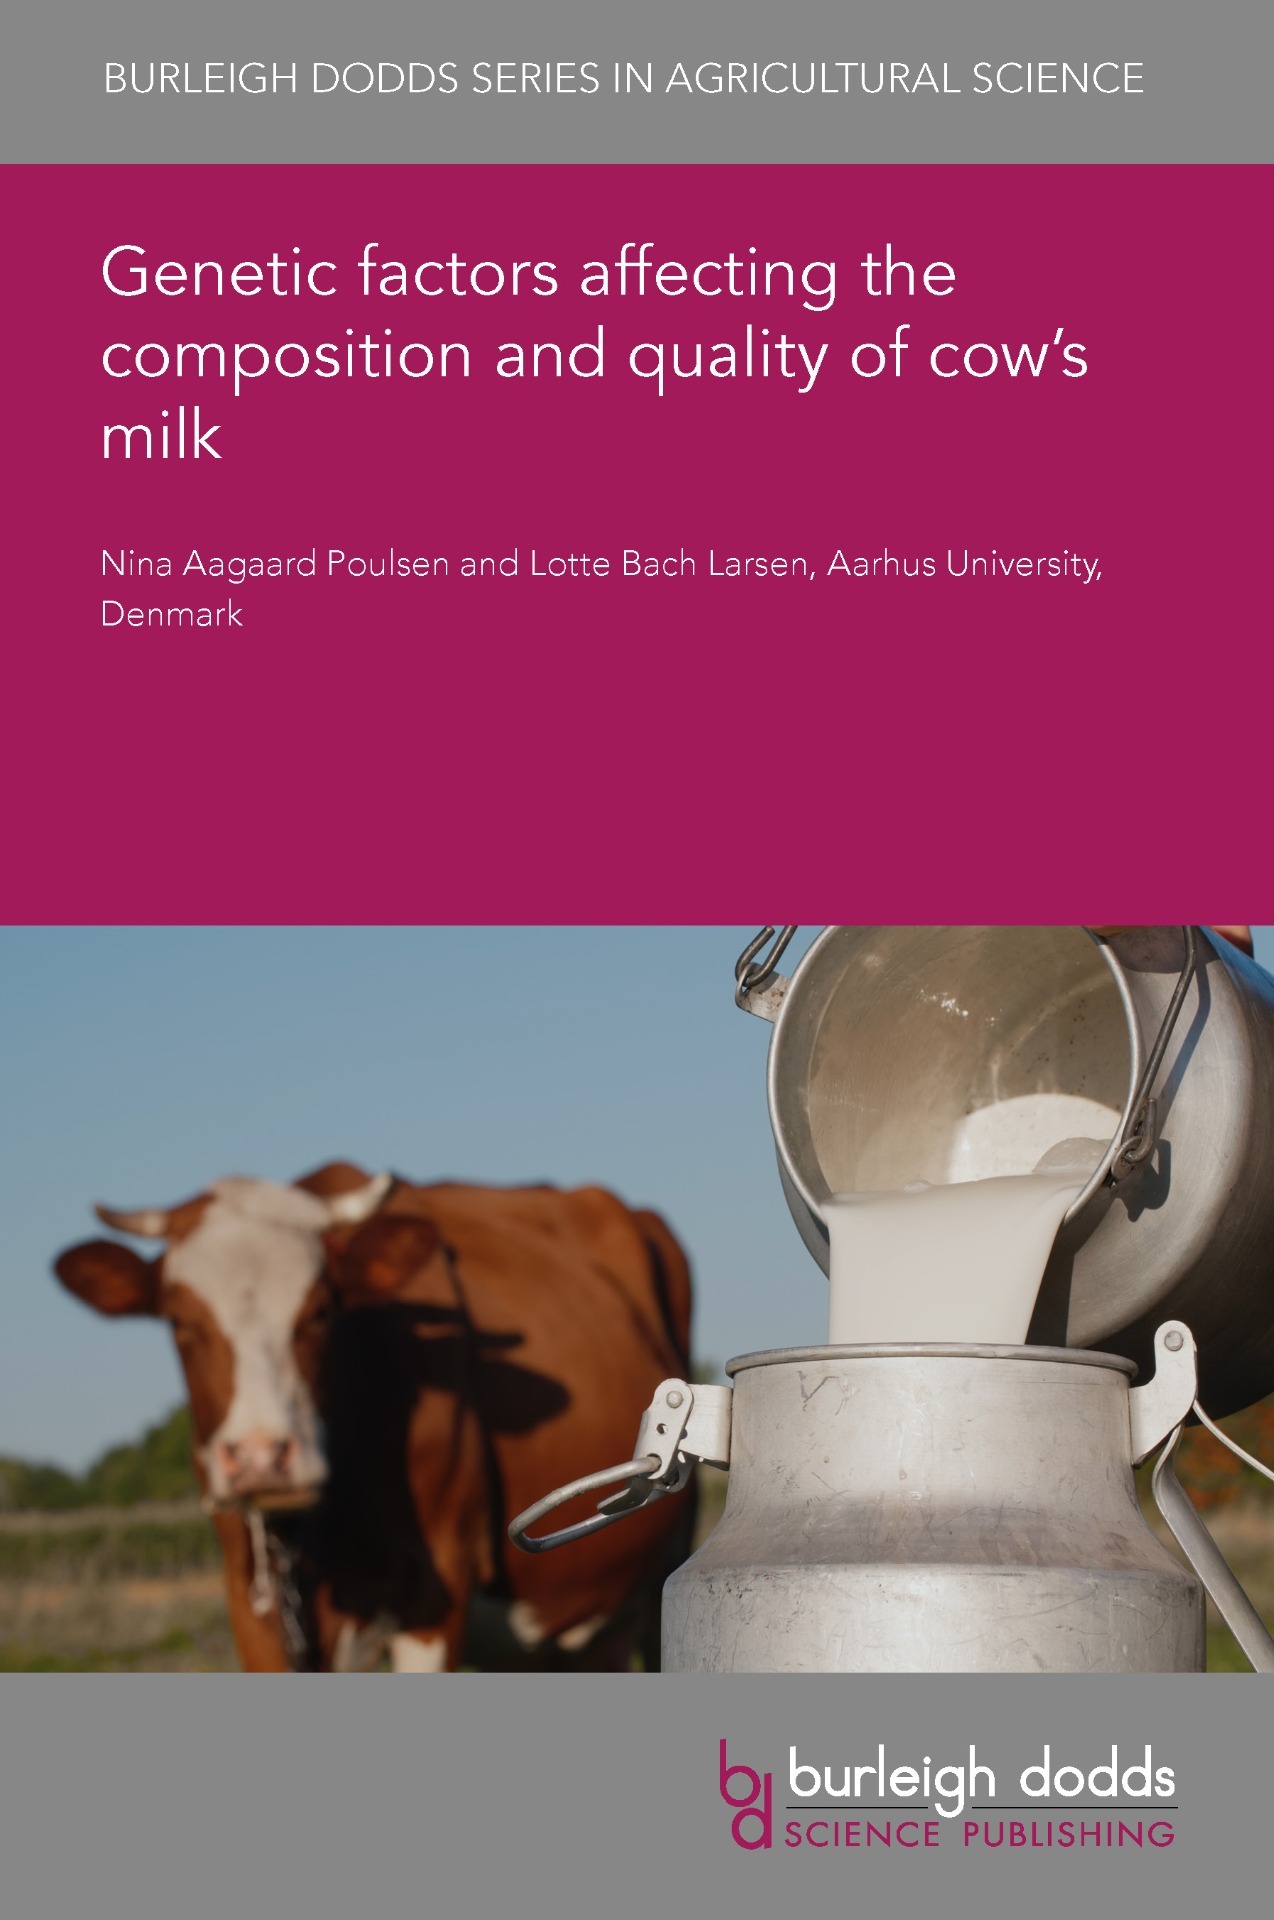 Genetic factors affecting the composition and quality of cow's milk